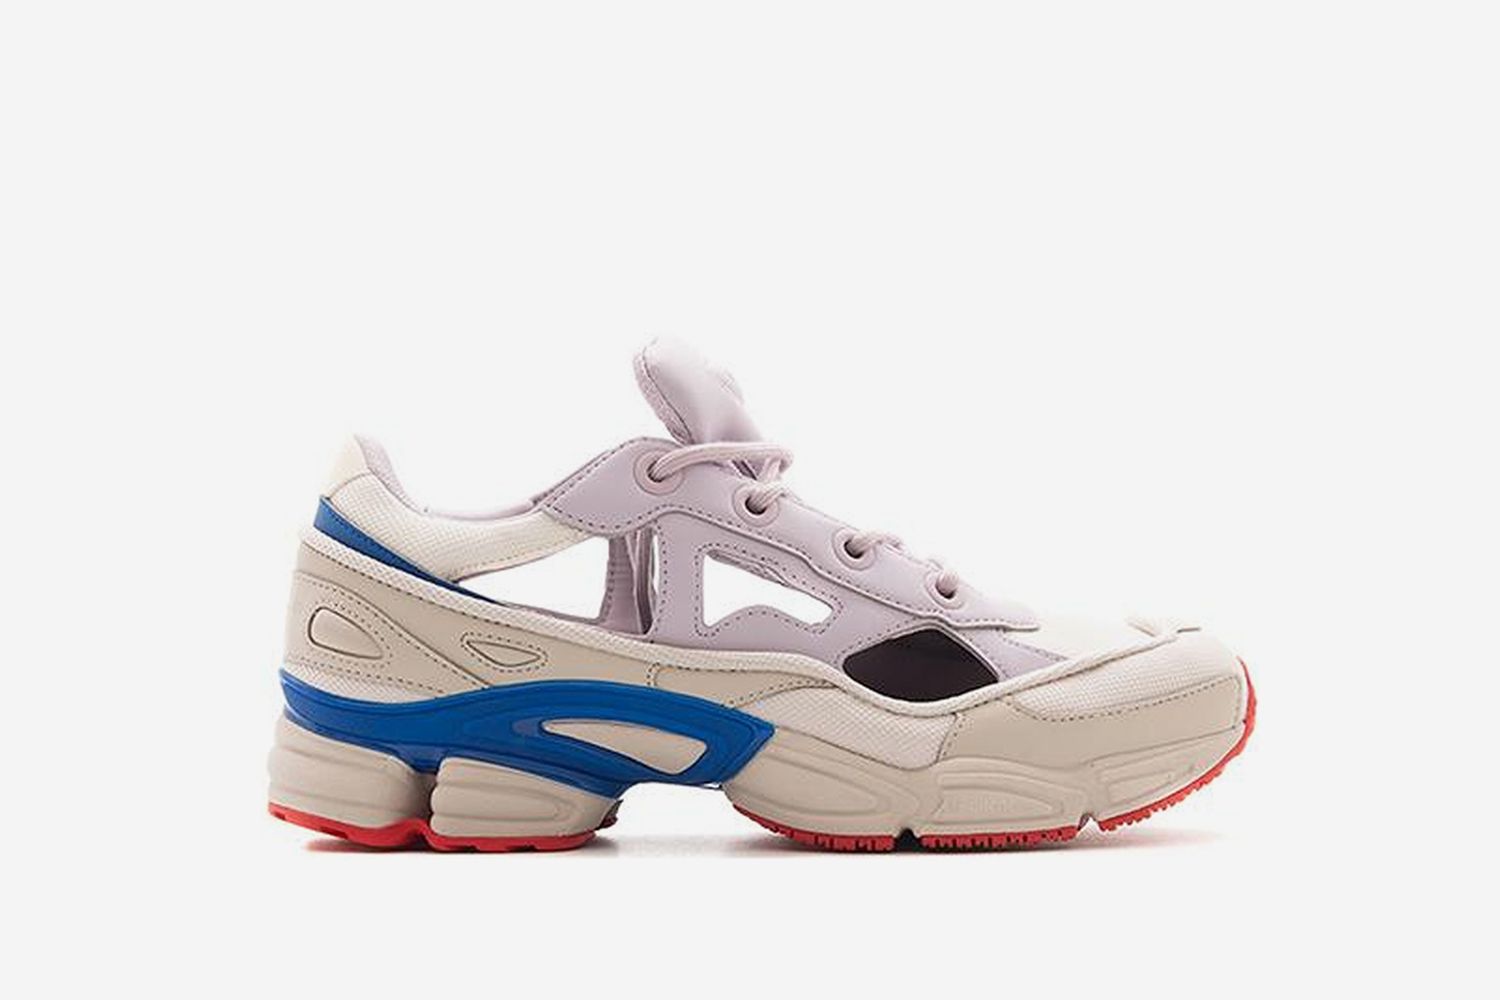 How to Buy the adidas by Raf Simons Replicant Ozweego USA Pack